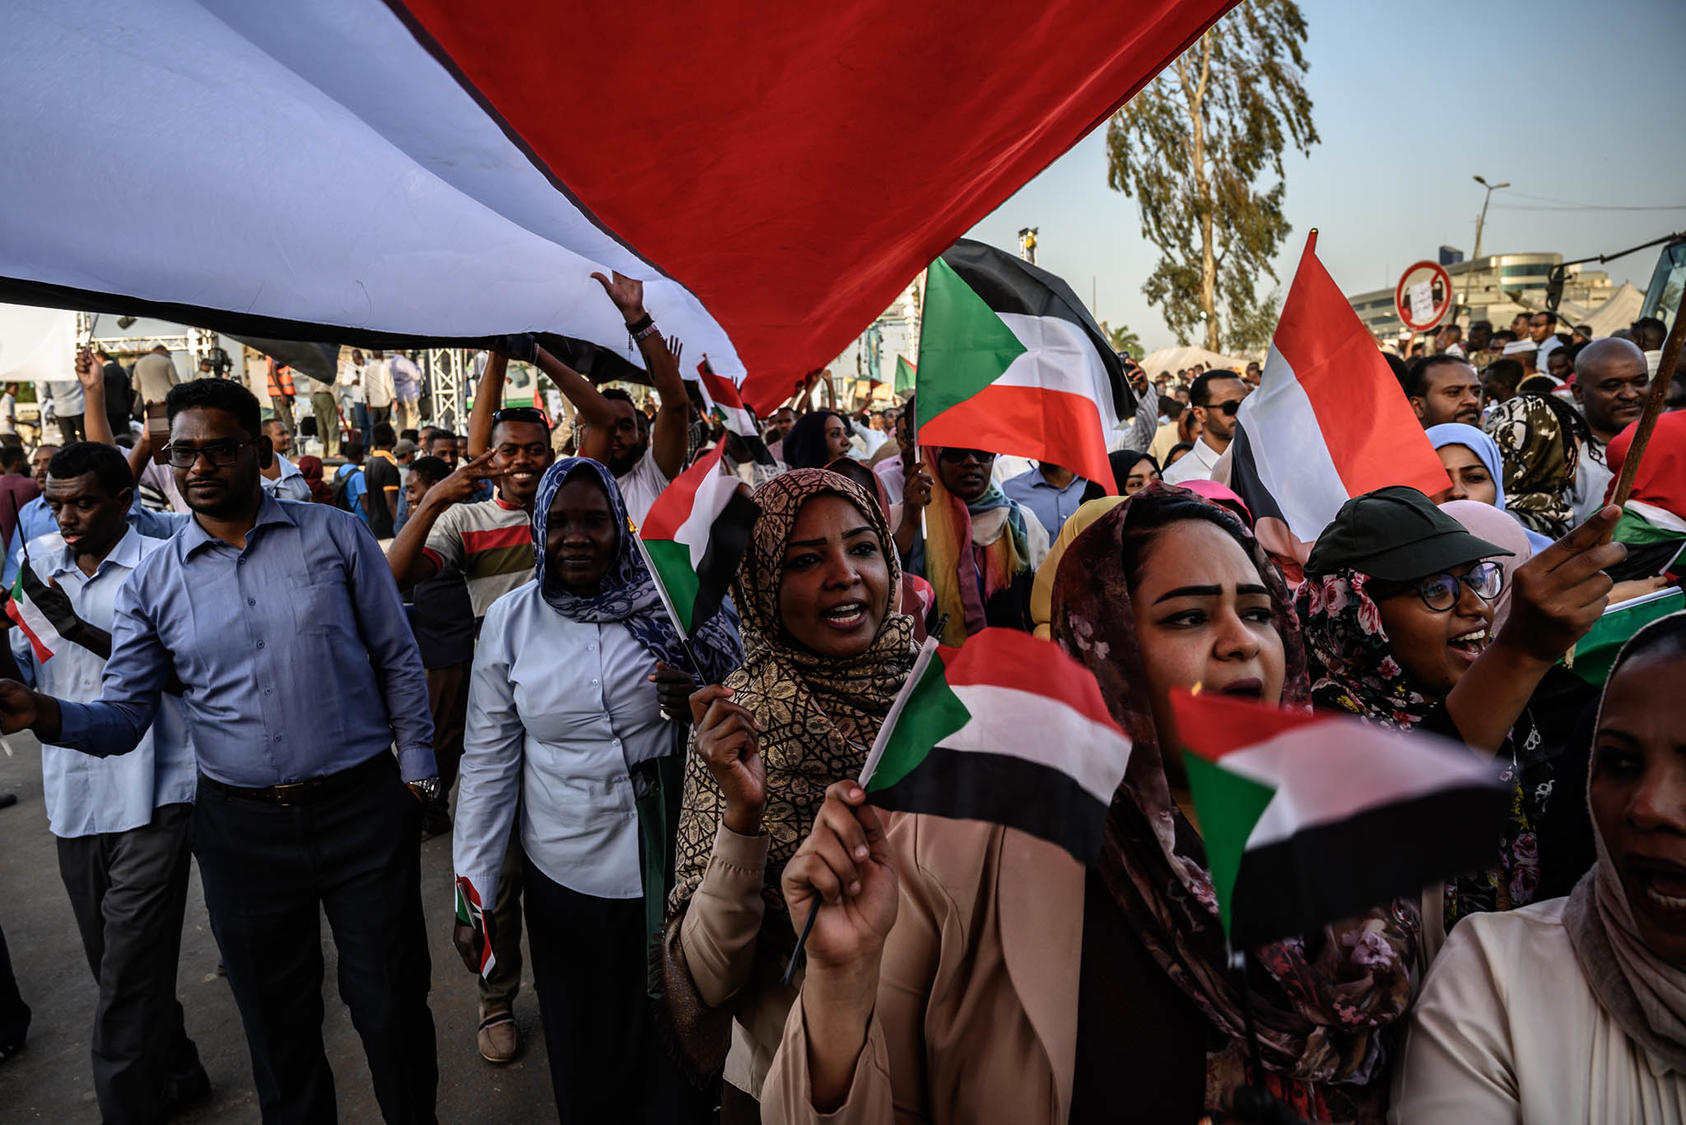 Sudanese demonstrators march during antigovernment protests in Khartoum. April 22, 2019. (Bryan Denton/The New York Times)